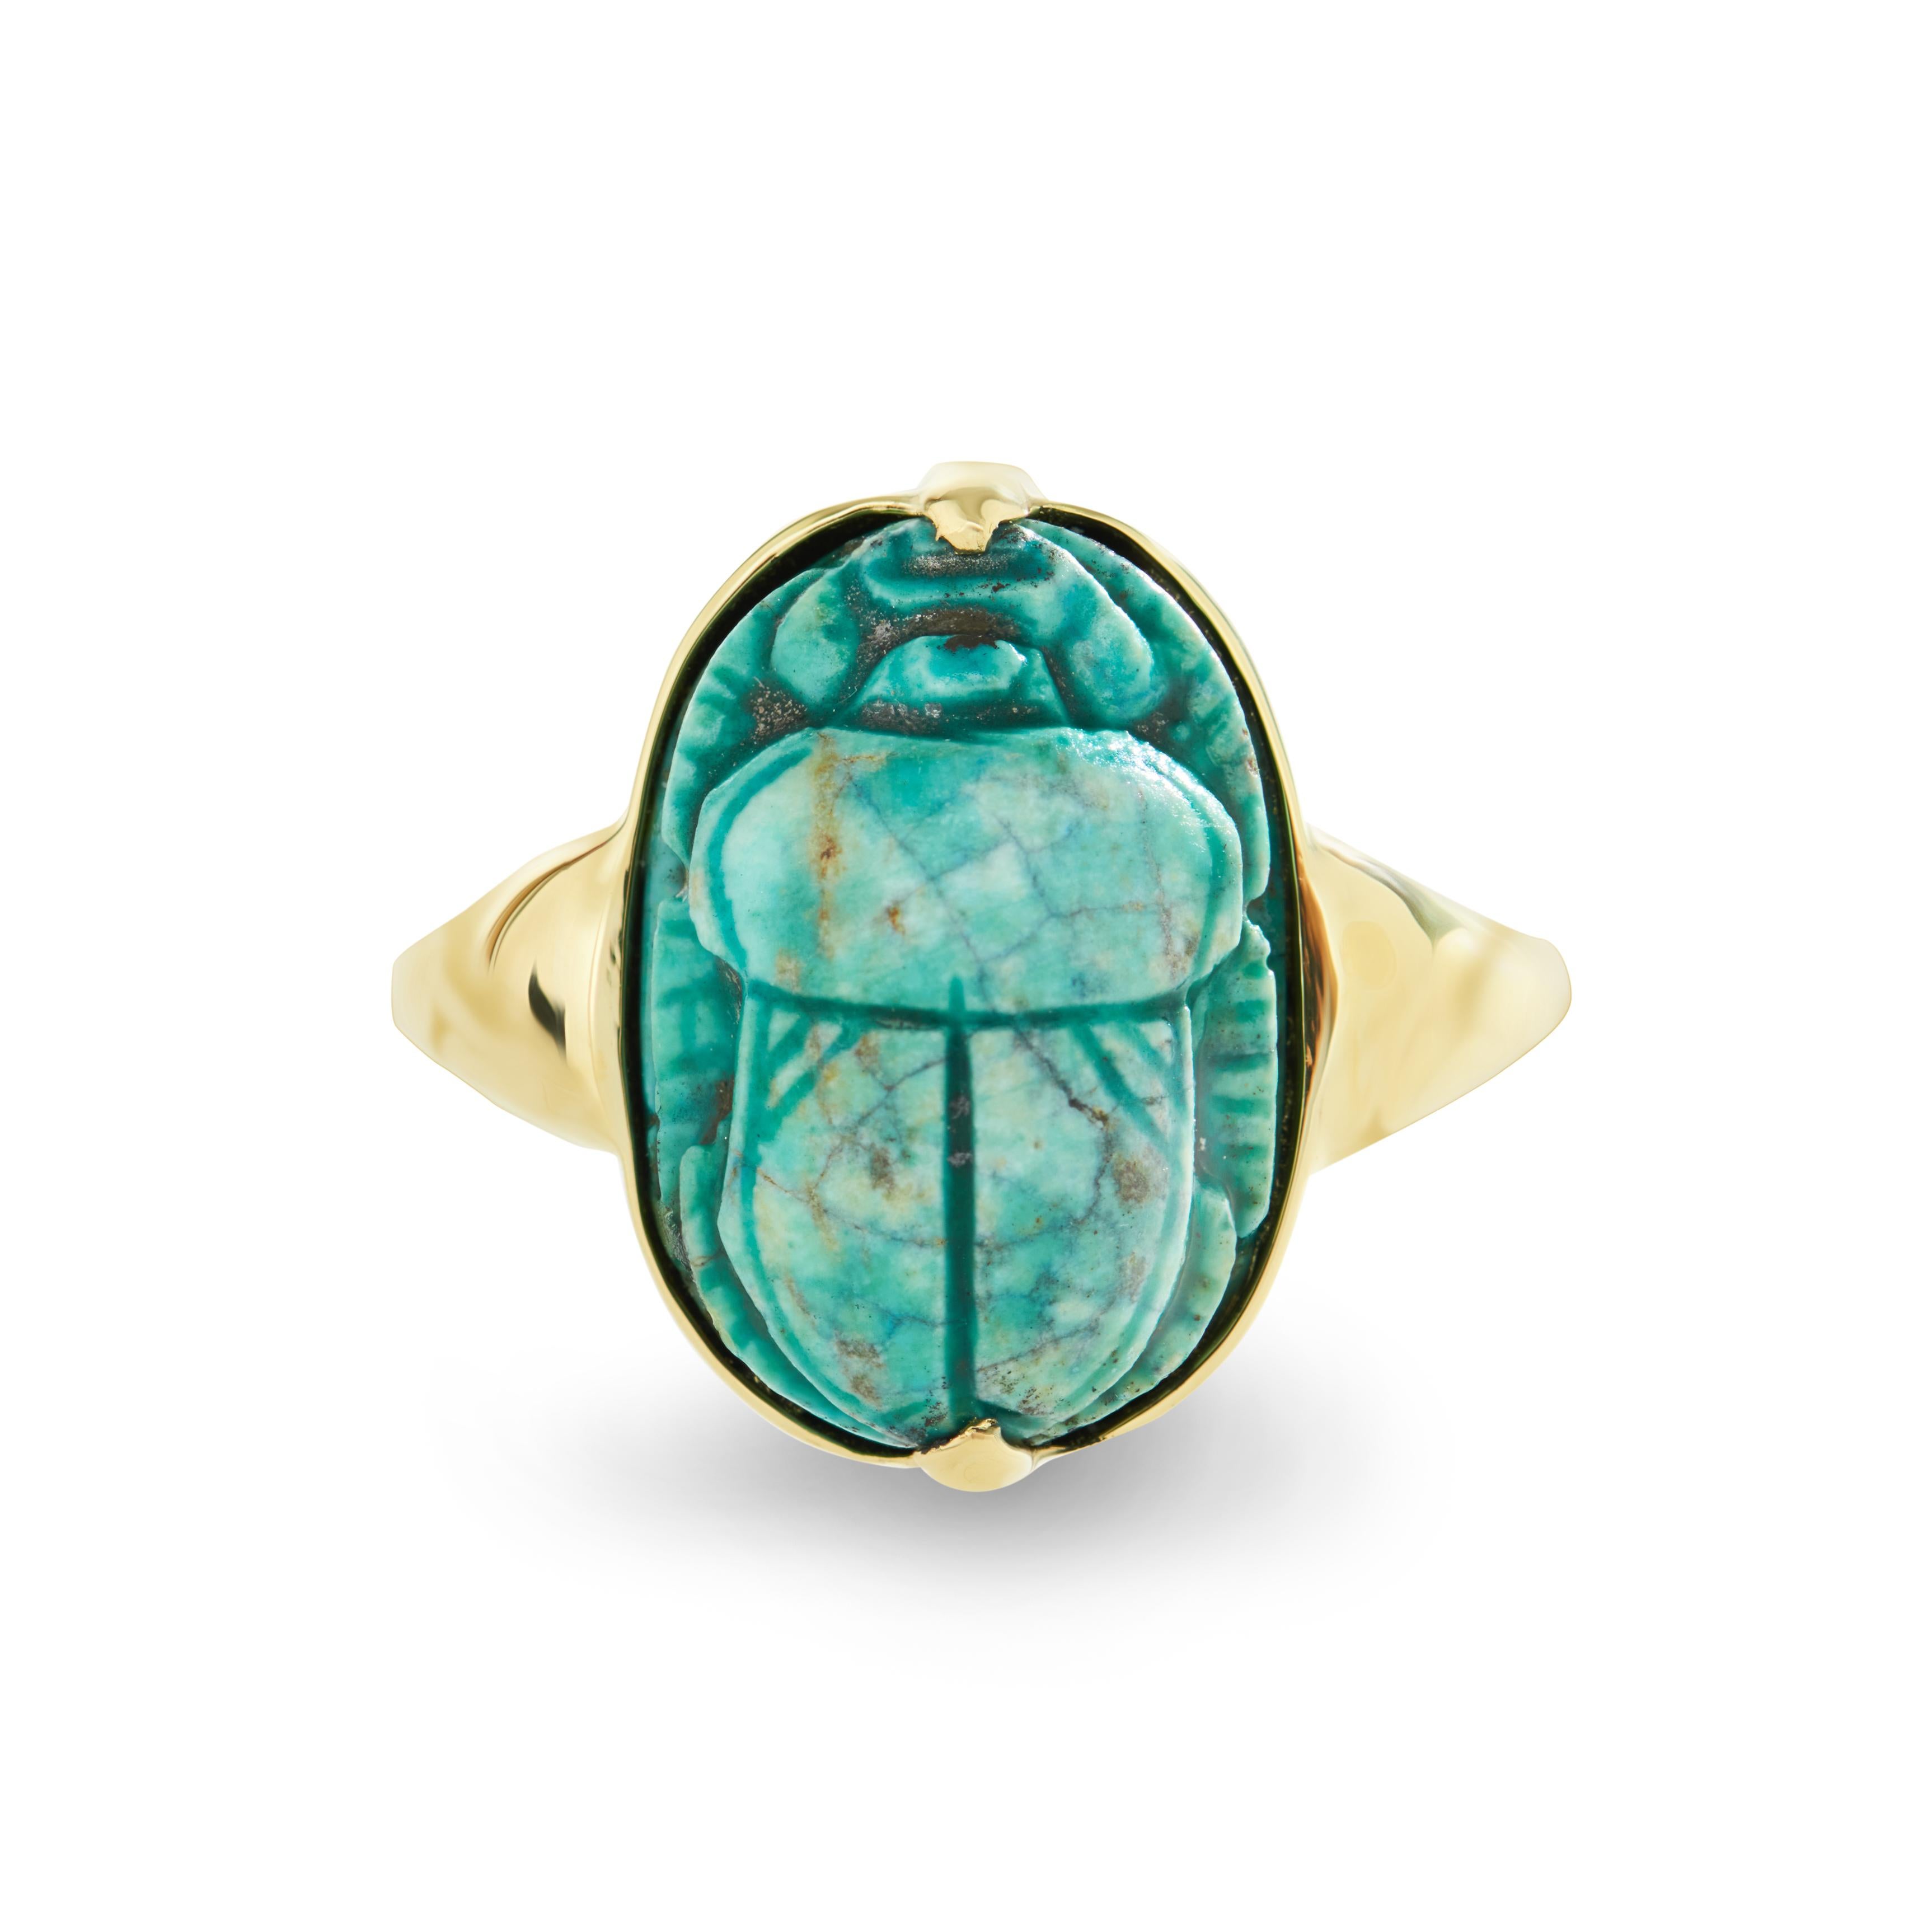 This DUBINI ring features an egyptian faience scarab set in 18K yellow gold.

See our selections of scarabs to create your unique ring.

Dimensions of Scarabs:
13x19x10mm

HISTORY
Along with the pyramids, sphinxes, and mummies, the scarabs are one